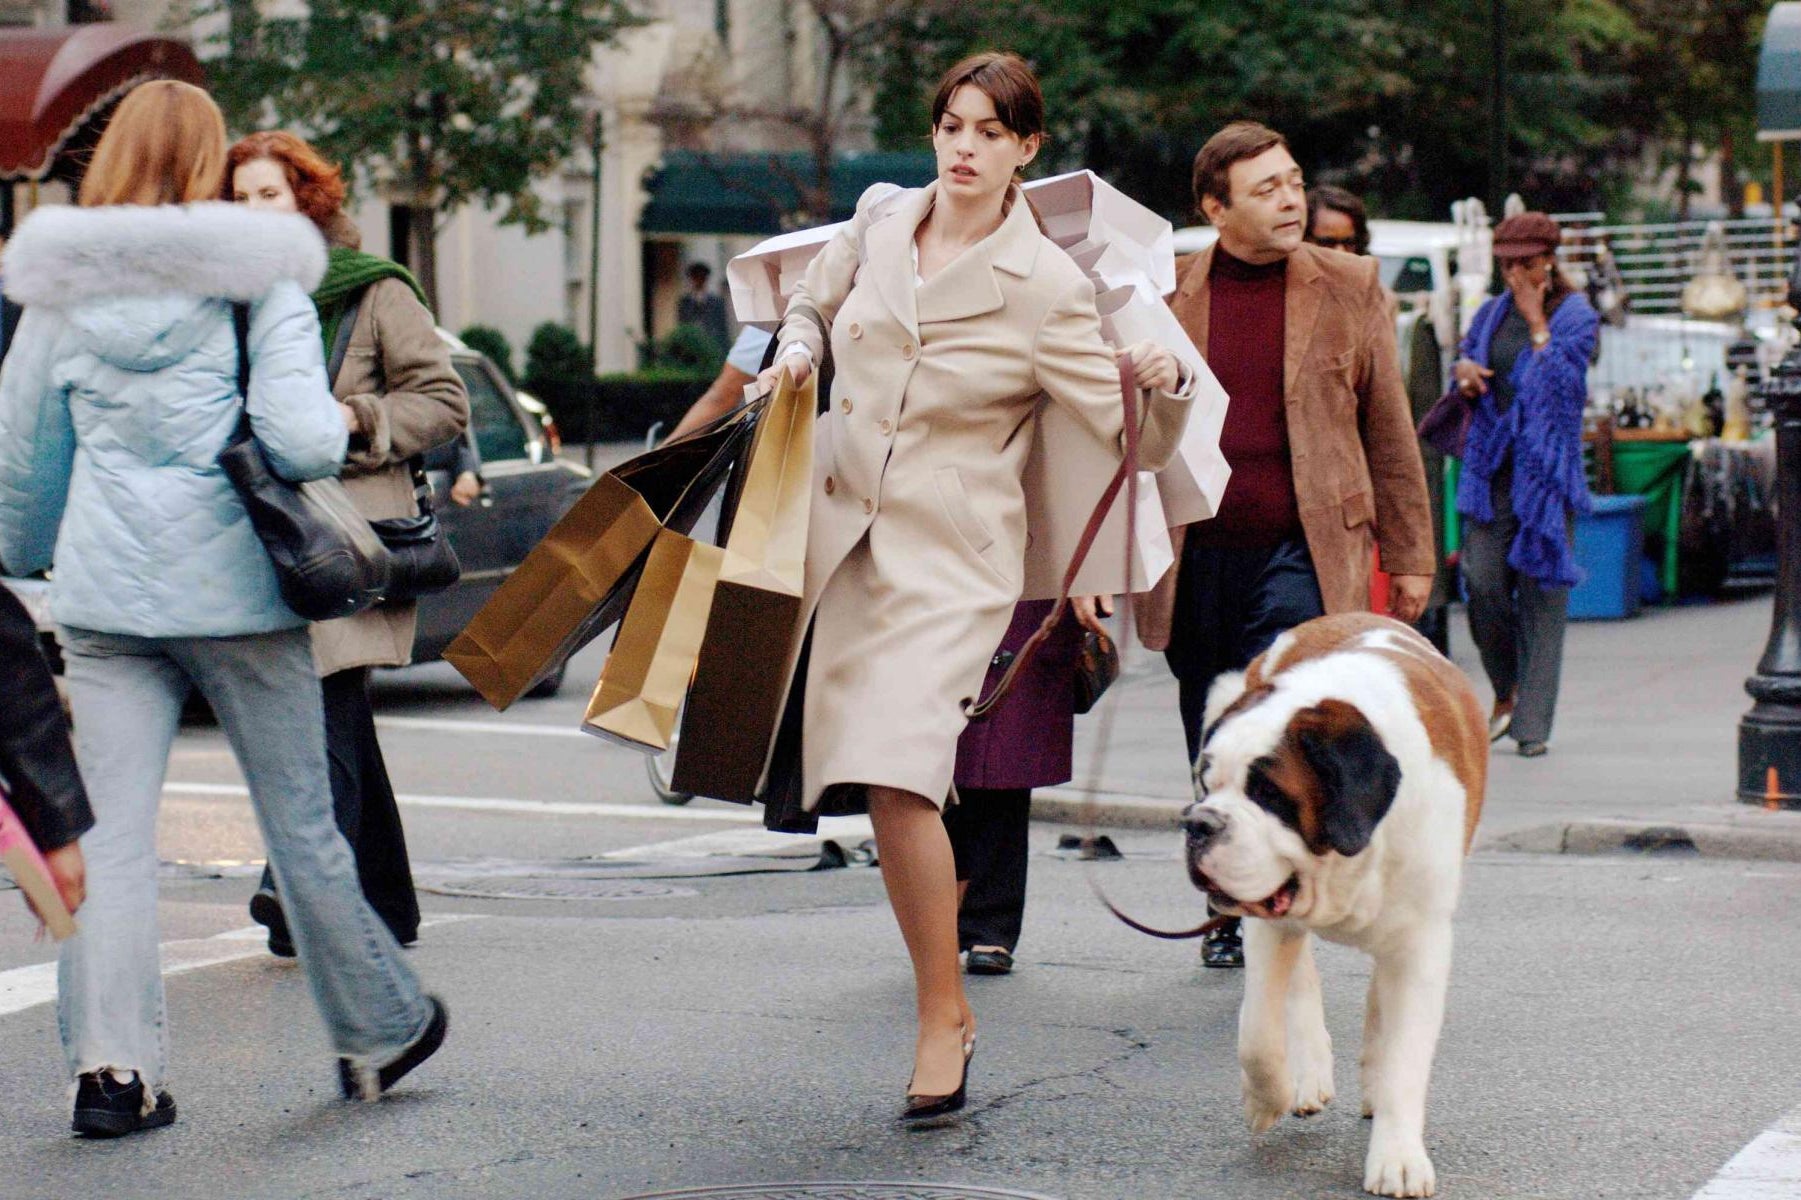 A white woman with brown hair, pulled back in a low ponytail, wearing a two-piece white suit/skirt set and heels, is rushing across a busy New York crosswalk. She is holding multiple shopping bags in both of her hands, as well as has her purple purse hanging from her arm. In her left hand, she is also holding a leash and walking a large Saint Bernard dog. 